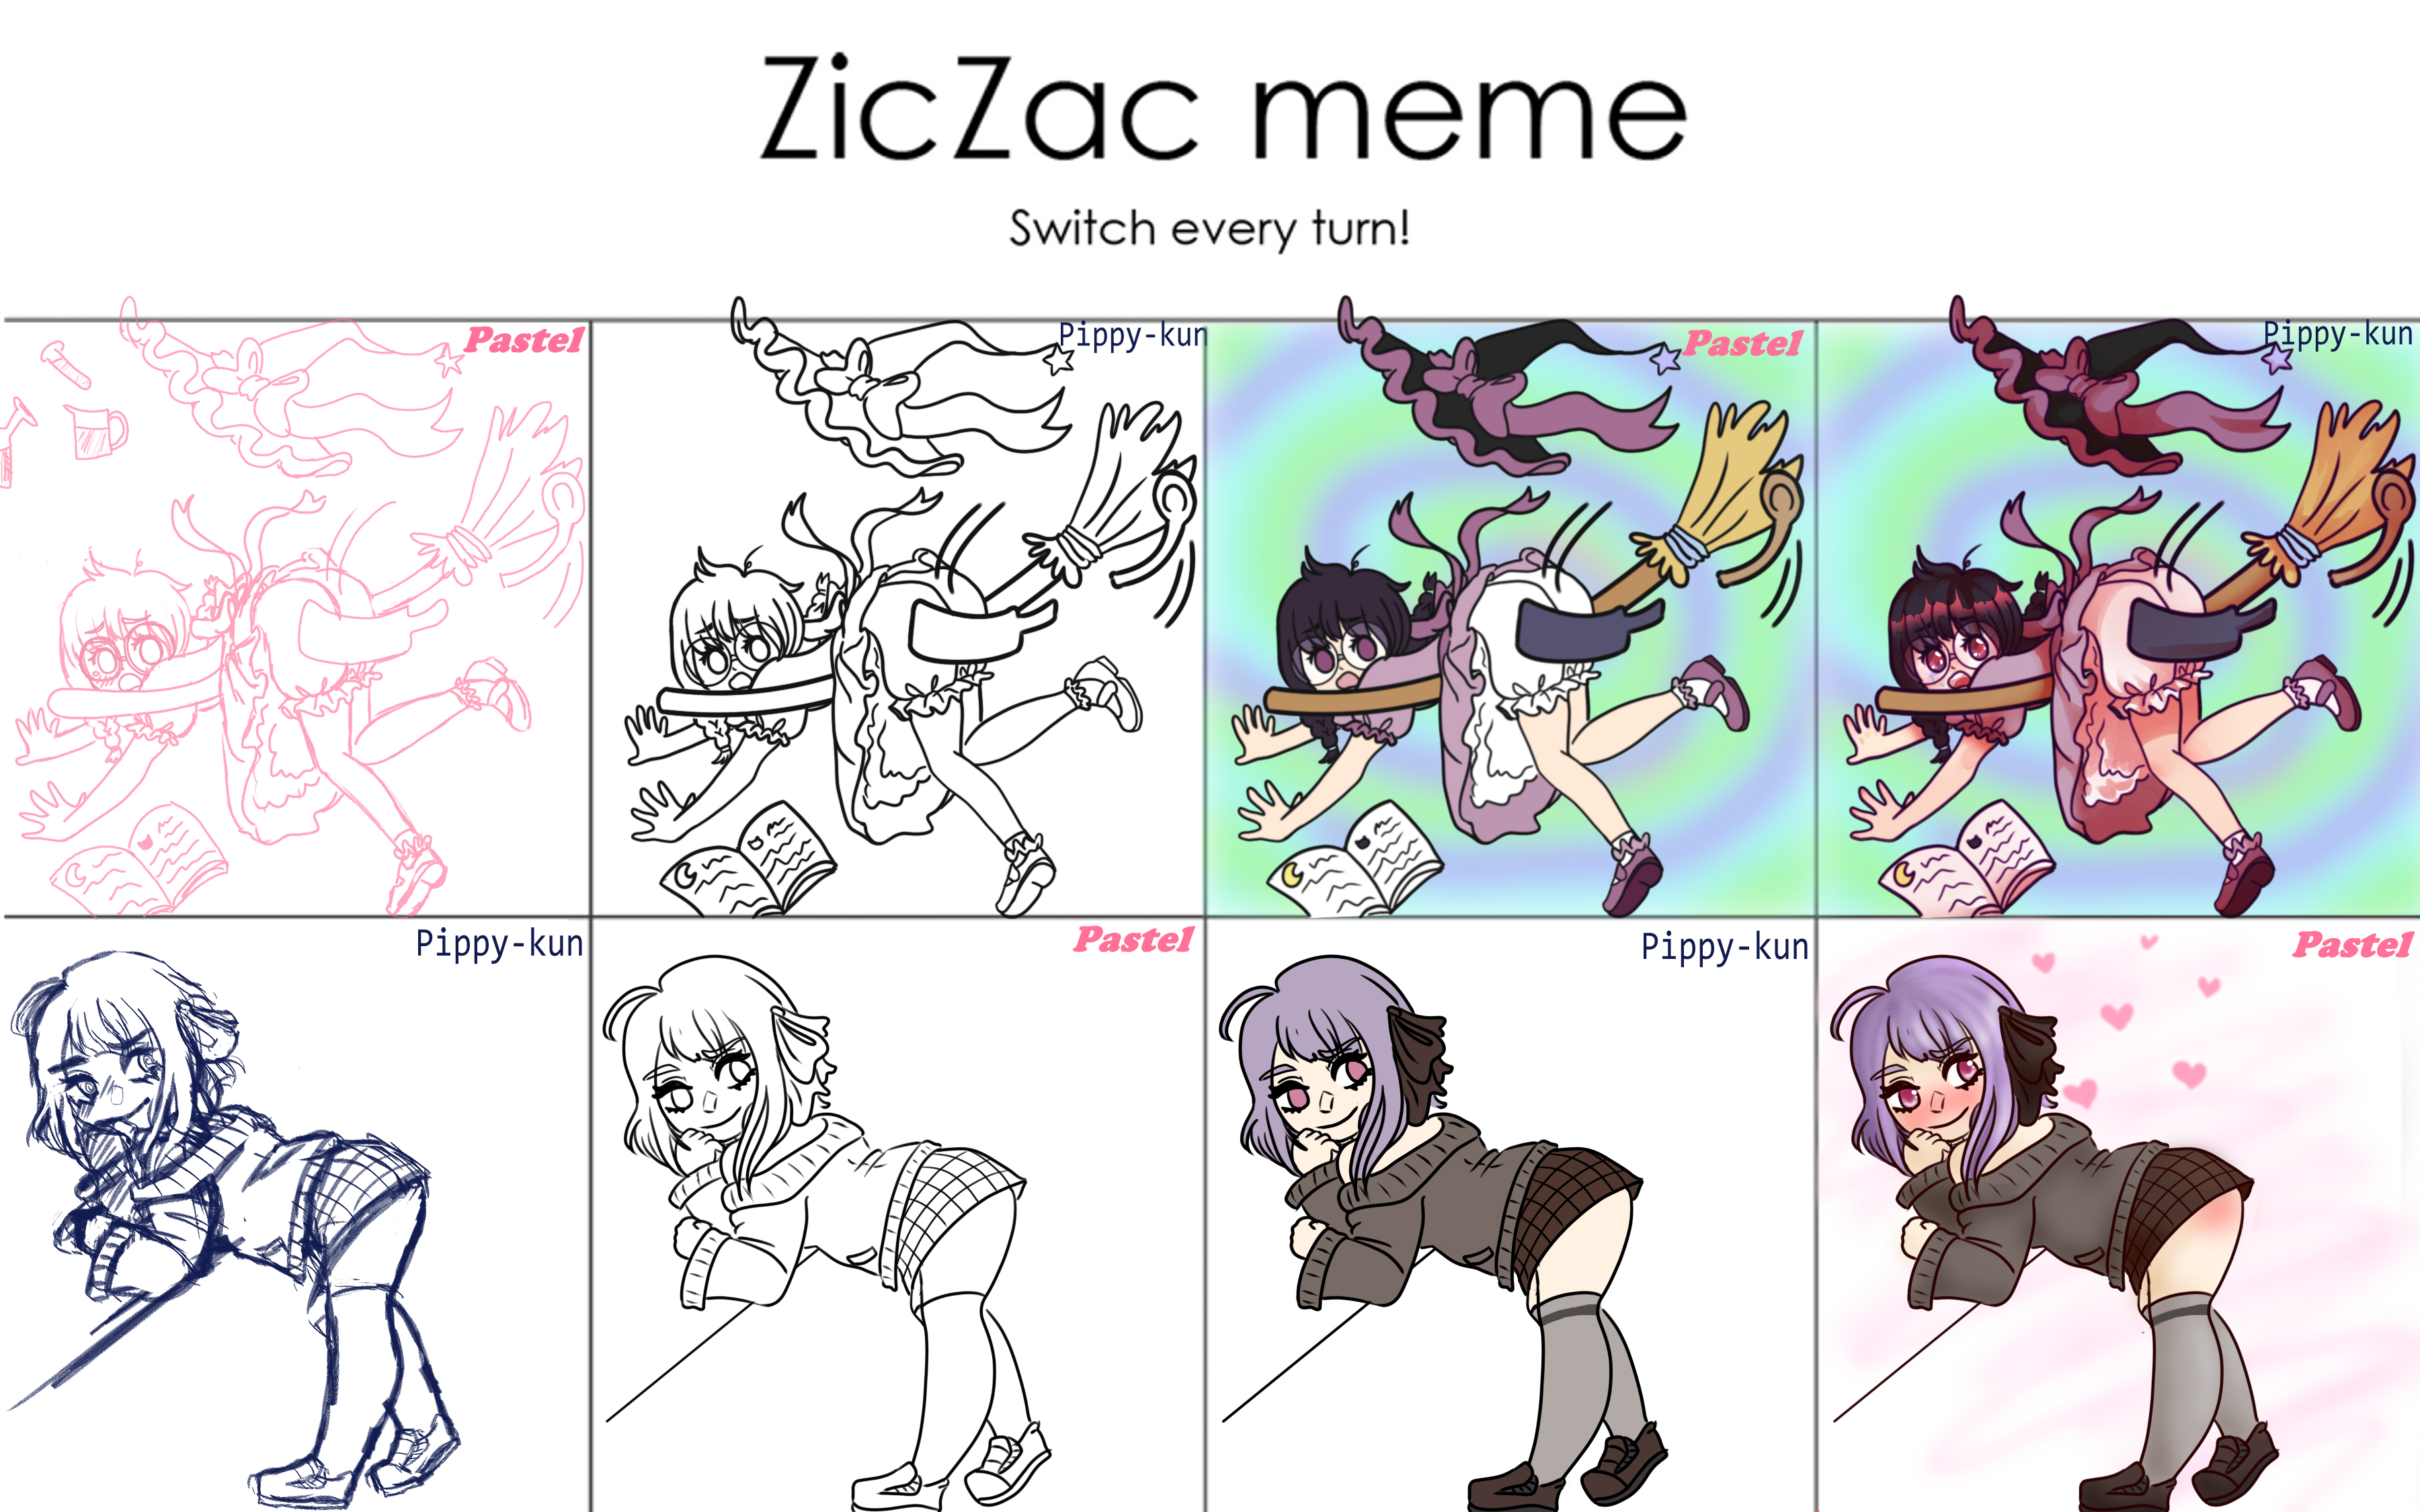 Zic Zac Meme with Pippy~! by Pastel